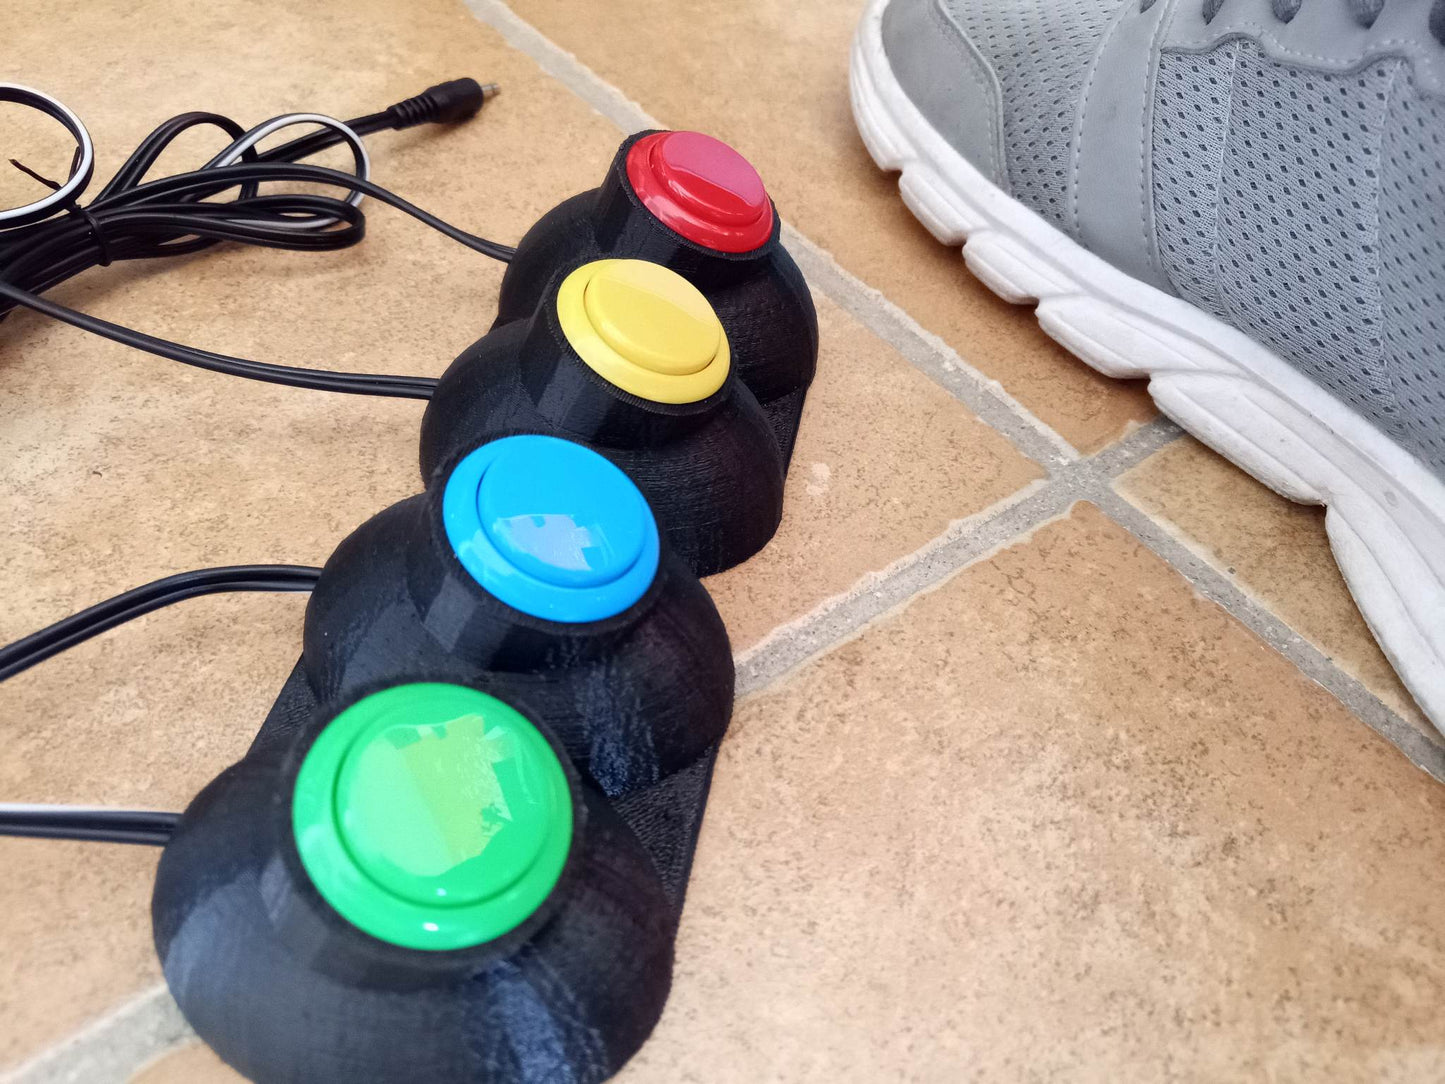 Arcade foot switches